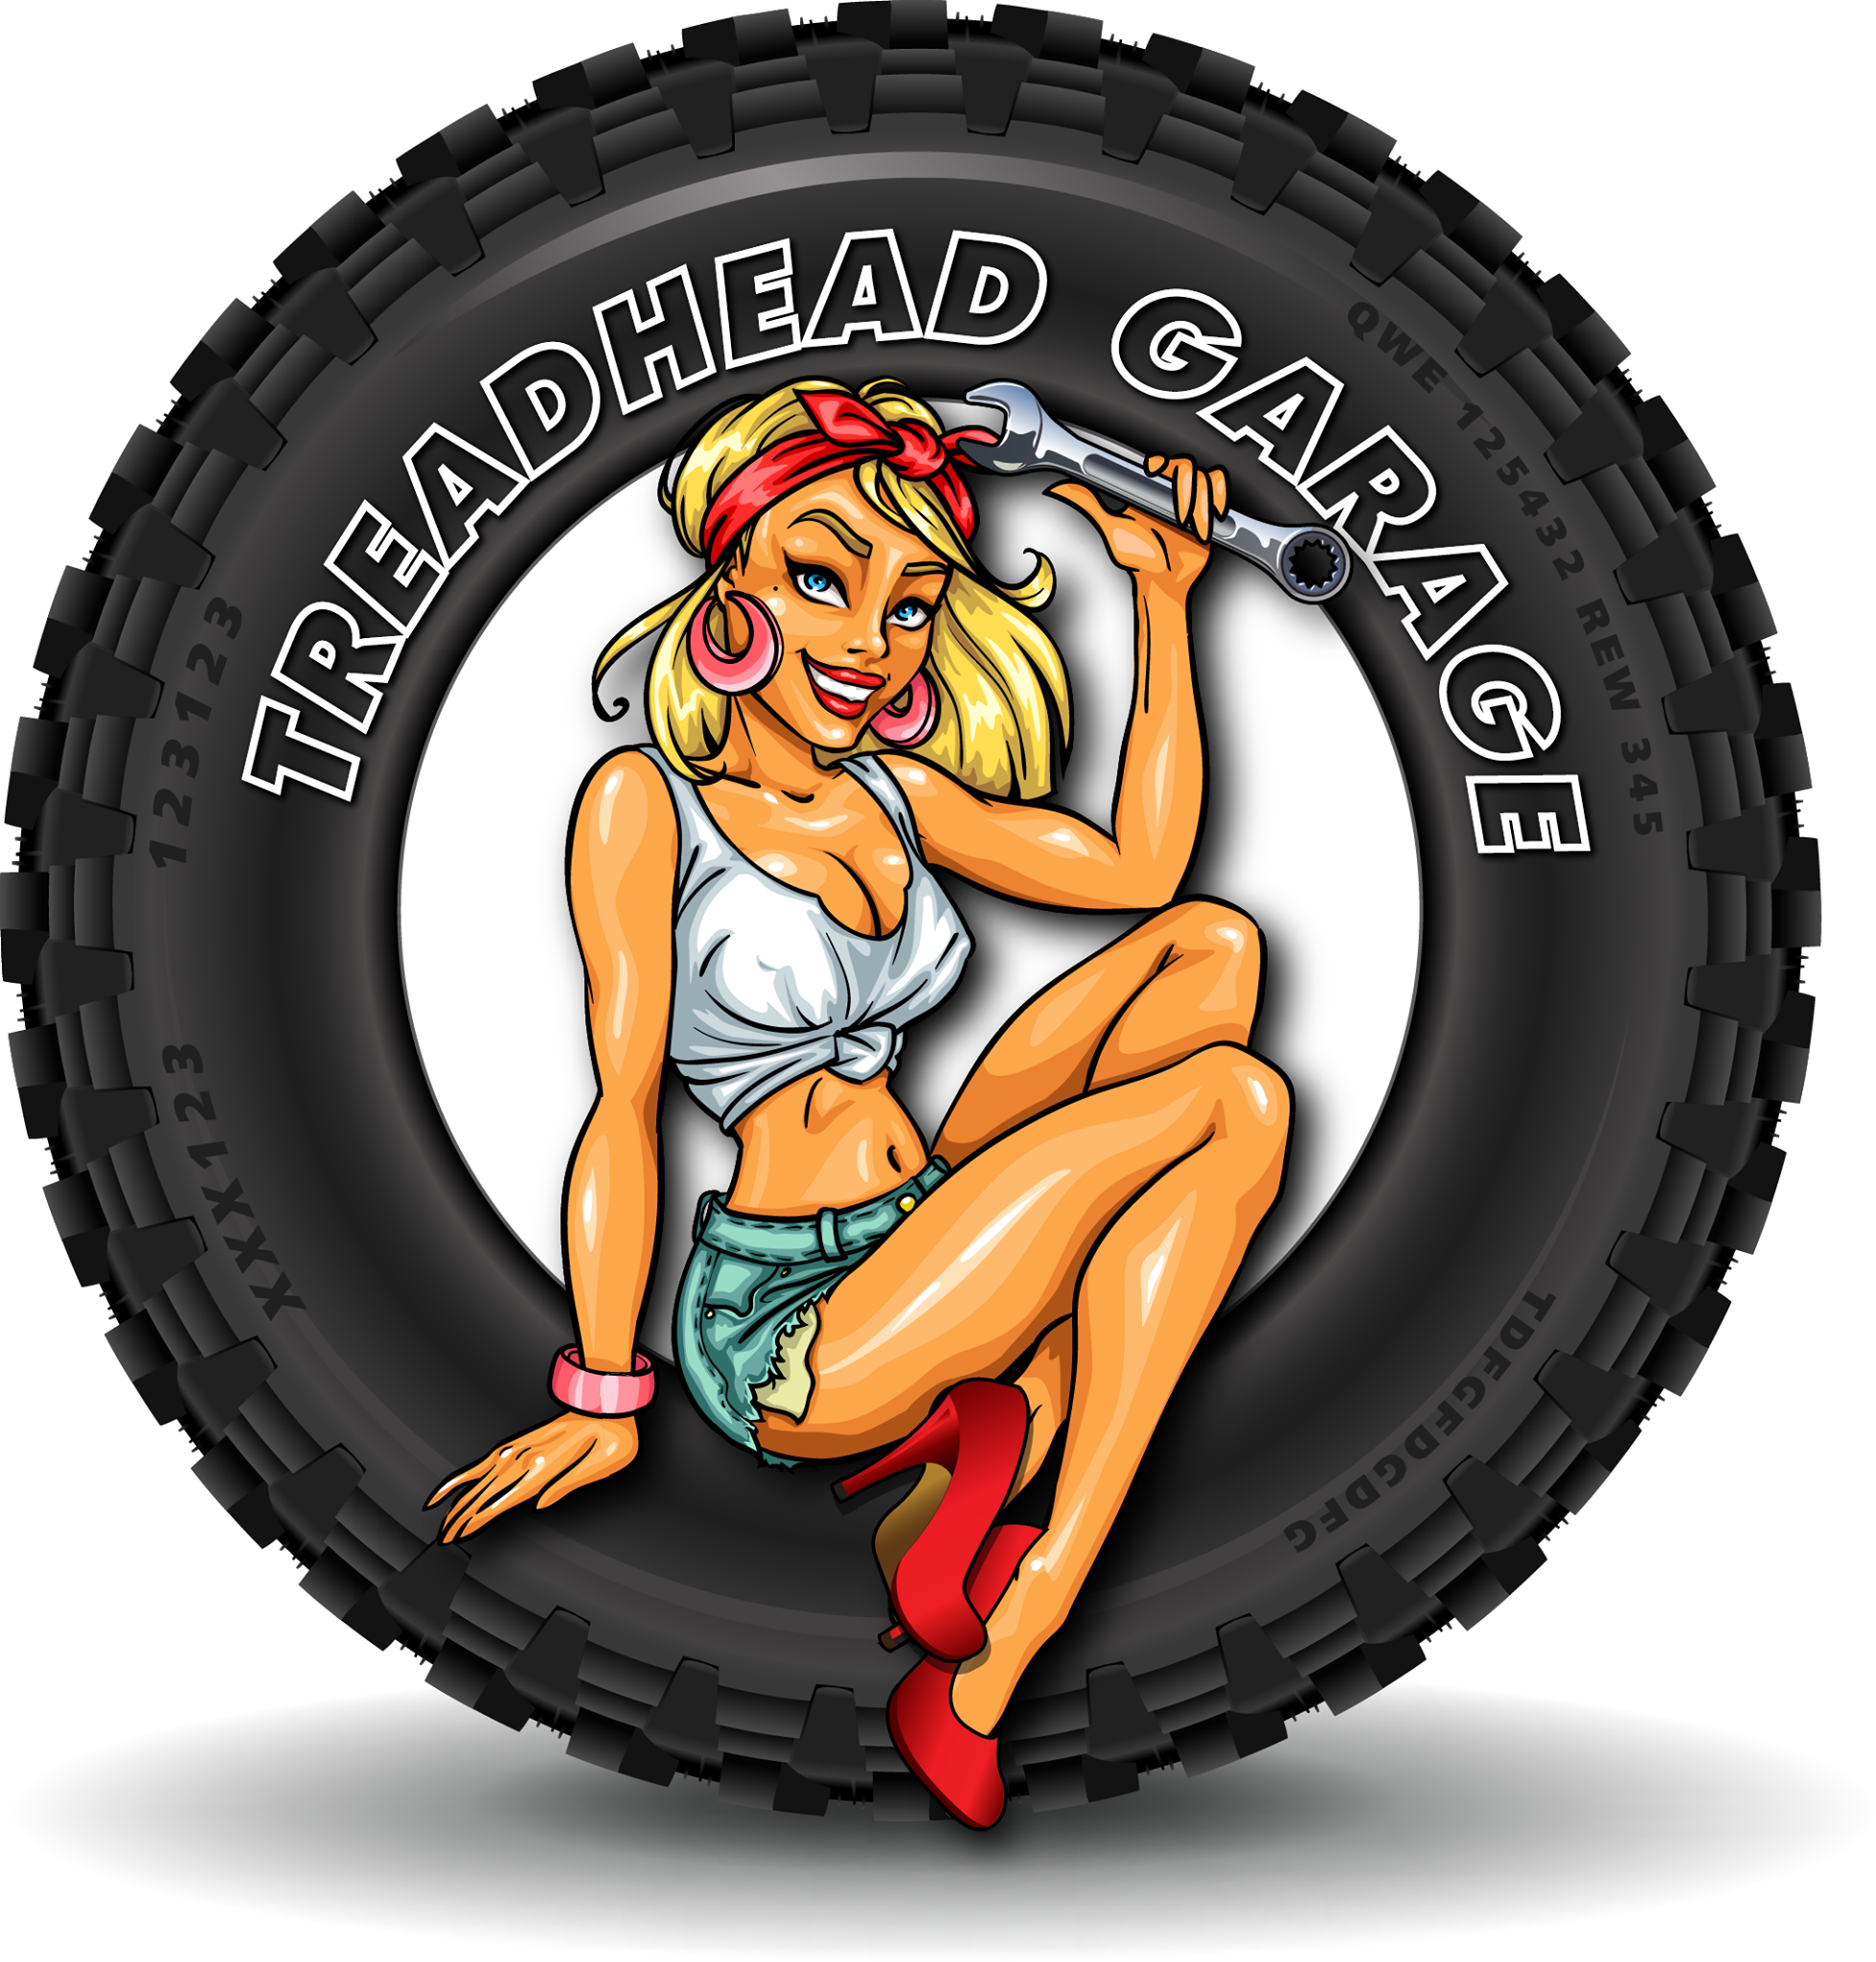 TreadHead Garage Edmonton Alberta Canada Providing quality parts and services for all makes and models. Adventure starts here! Jeep Toyota Ram Chevrolet GMC Nissan Lift kits Wheels Tires Bumpers Winches Overlanding Camping 